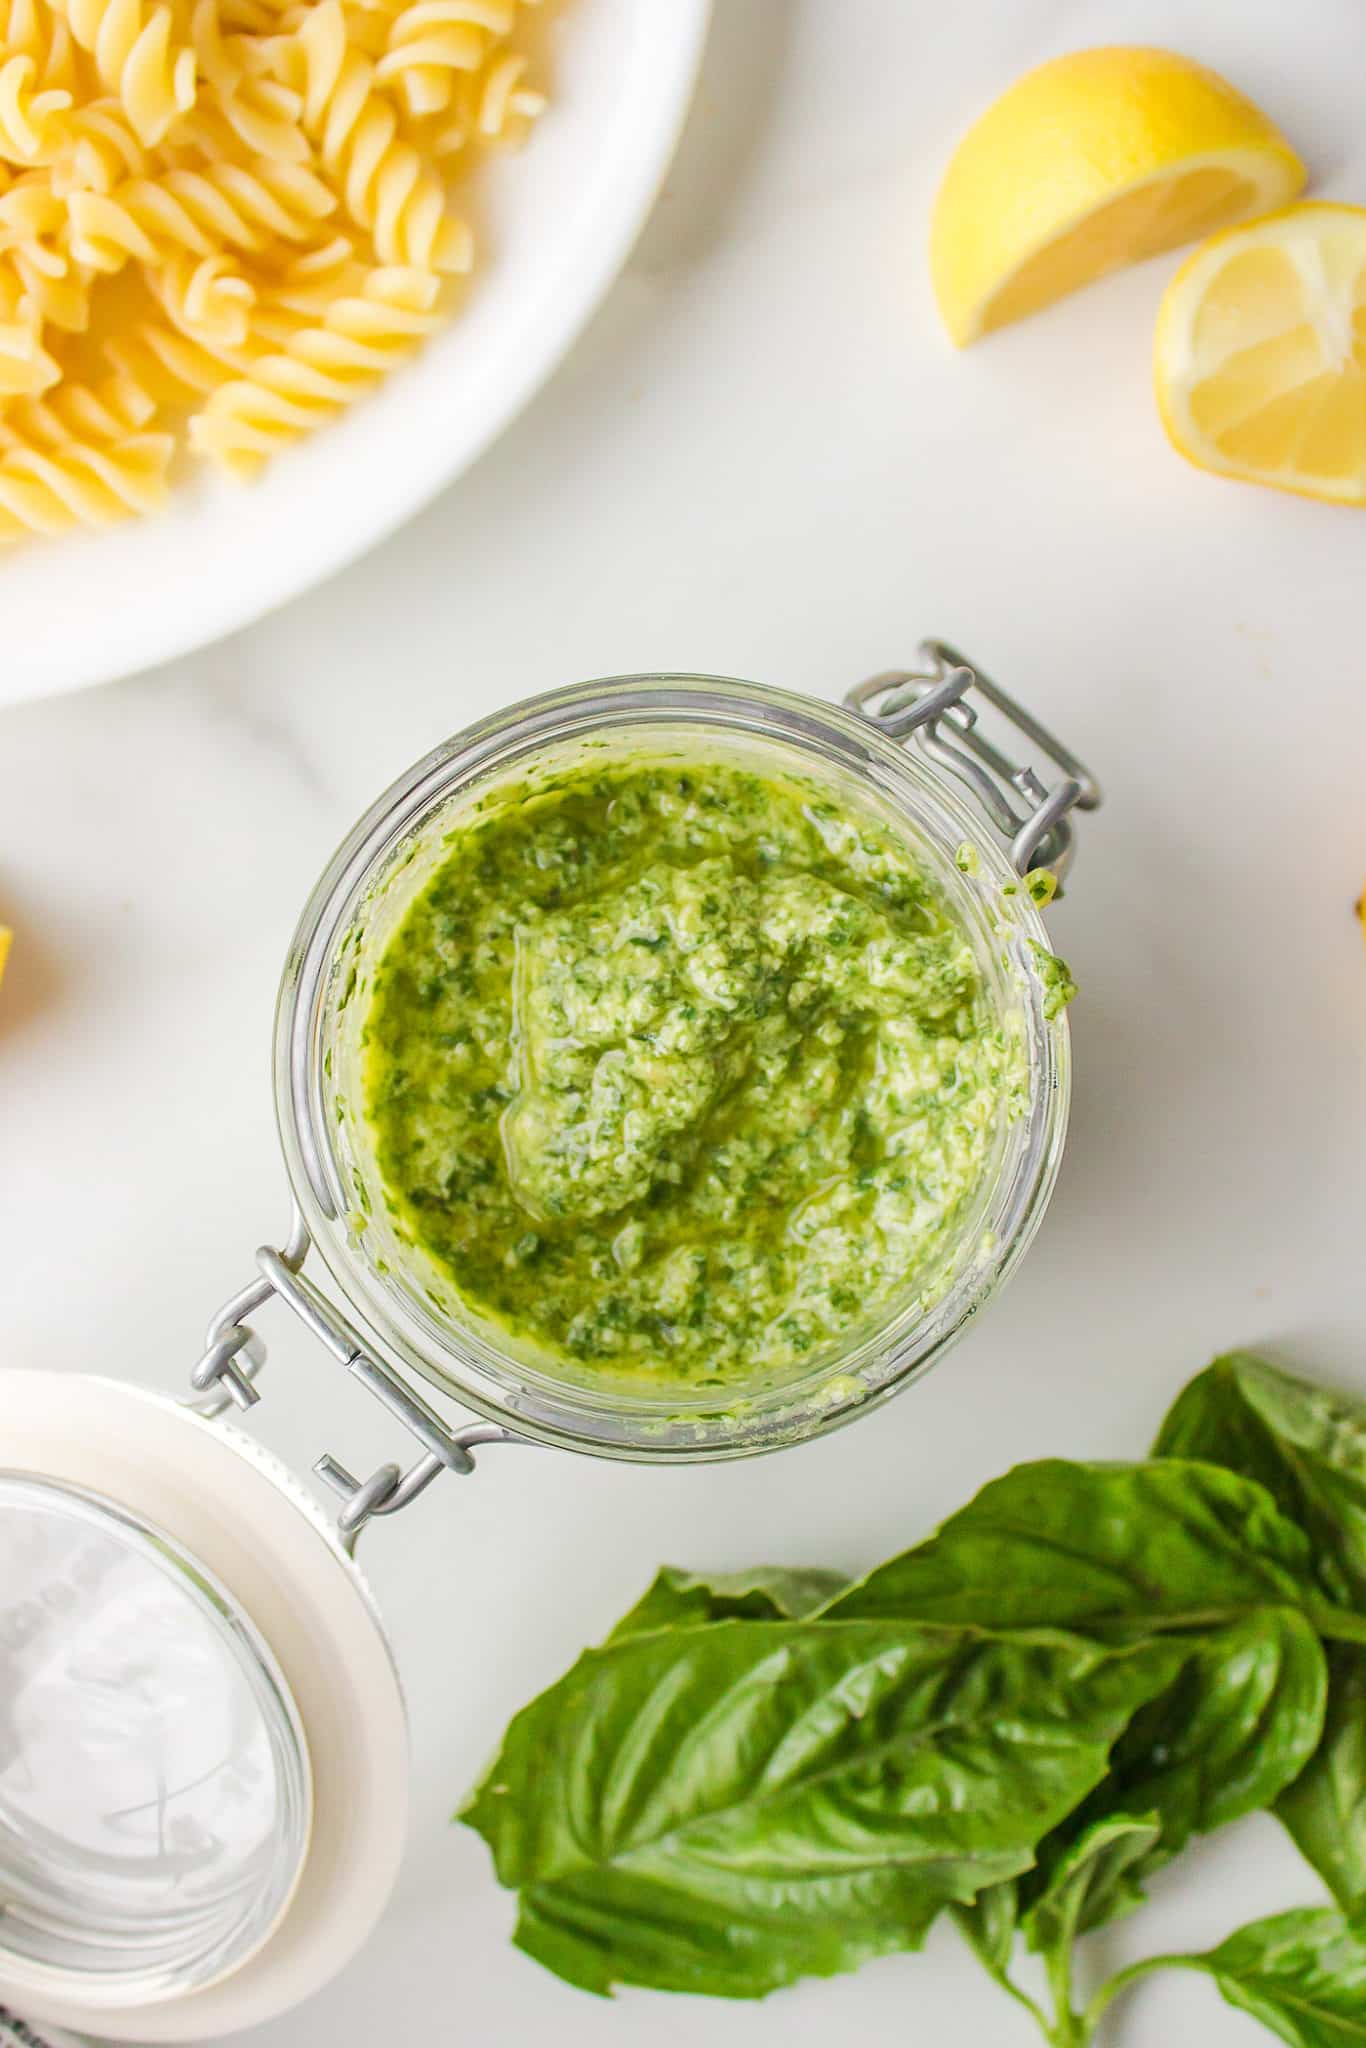 Looking inside a flip-top glass jar filled with pesto made without cheese.